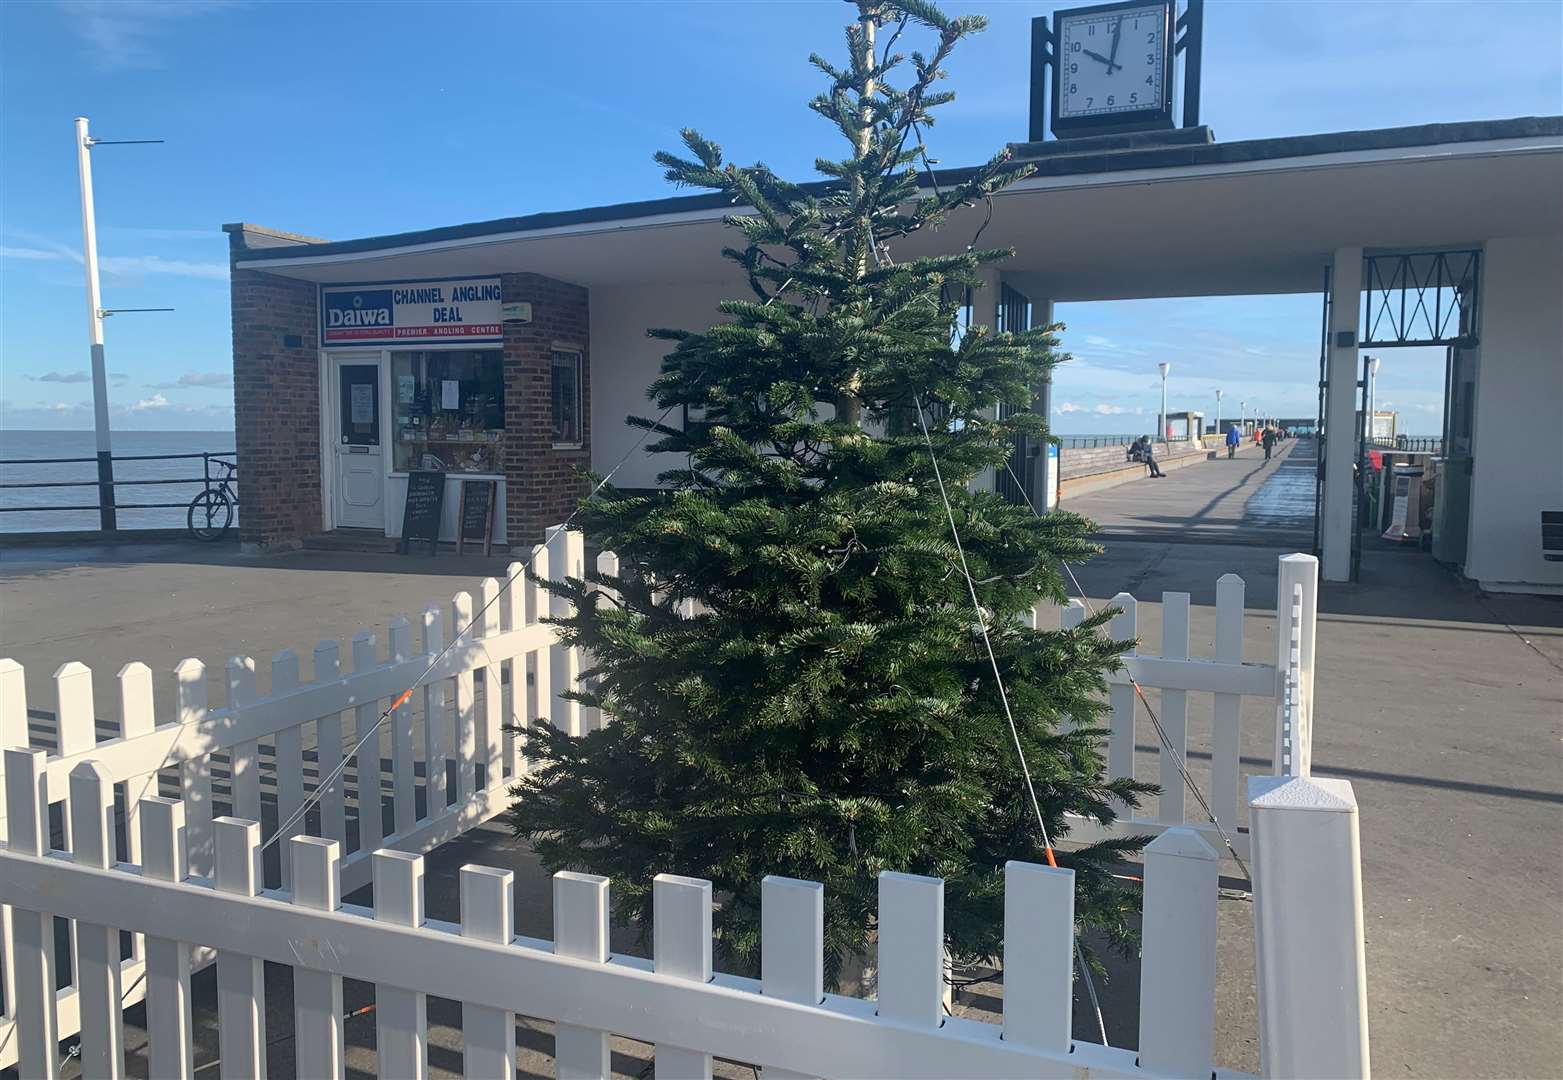 The Christmas tree in Deal is expected to be replaced with a better alternative